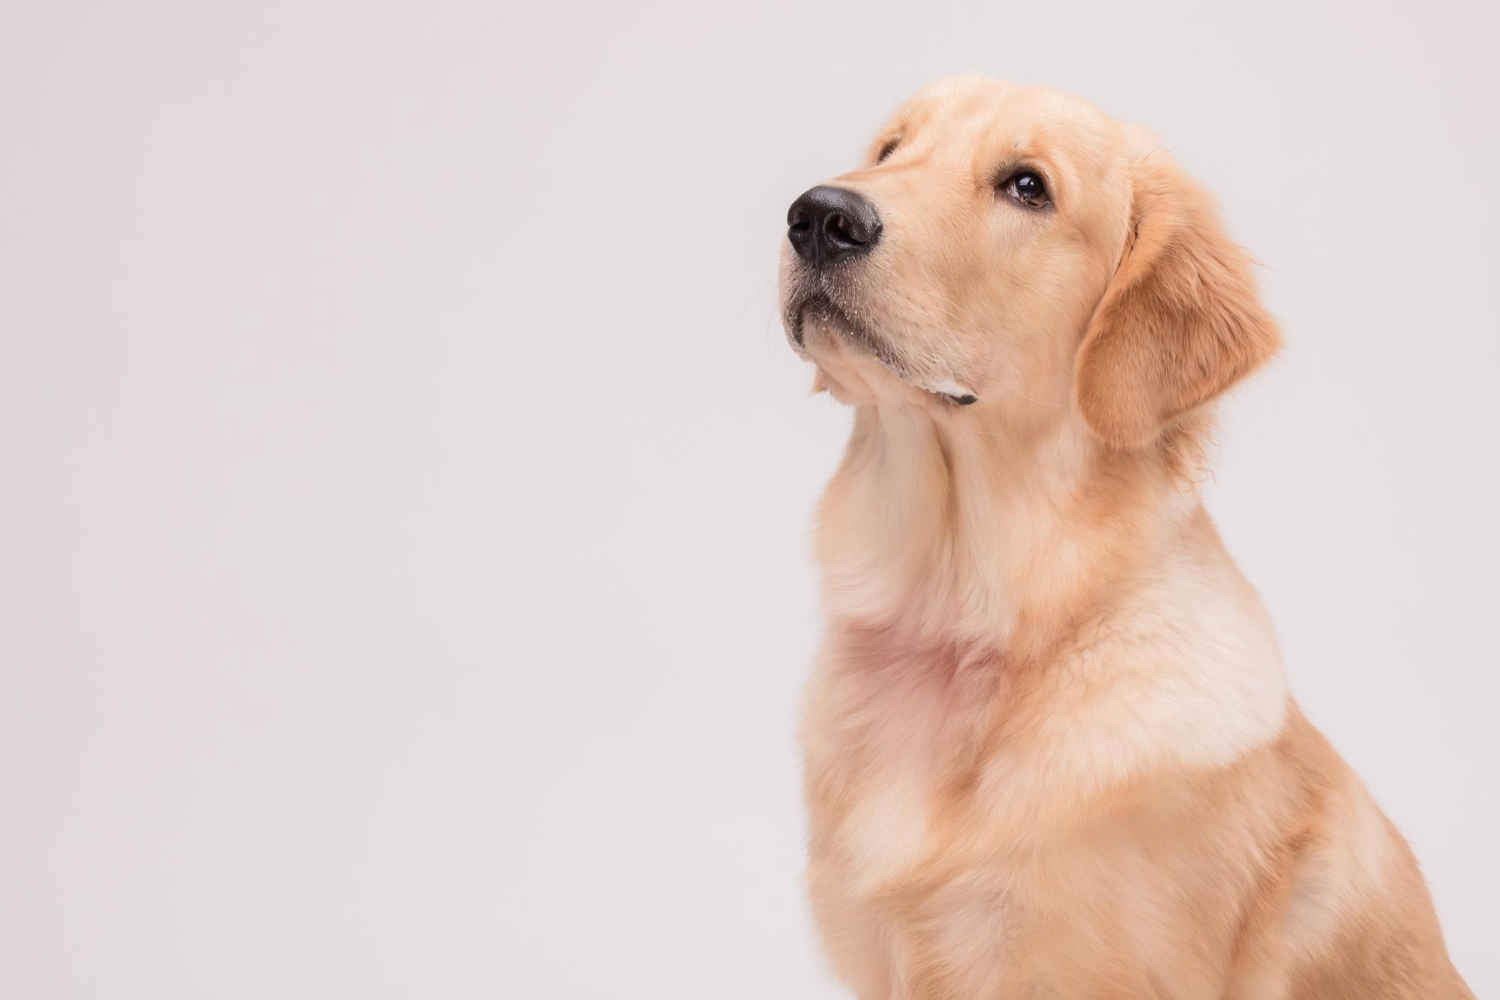 Is Your Labrador Retriever Suffering from Food Allergies? Here’s How to Tell